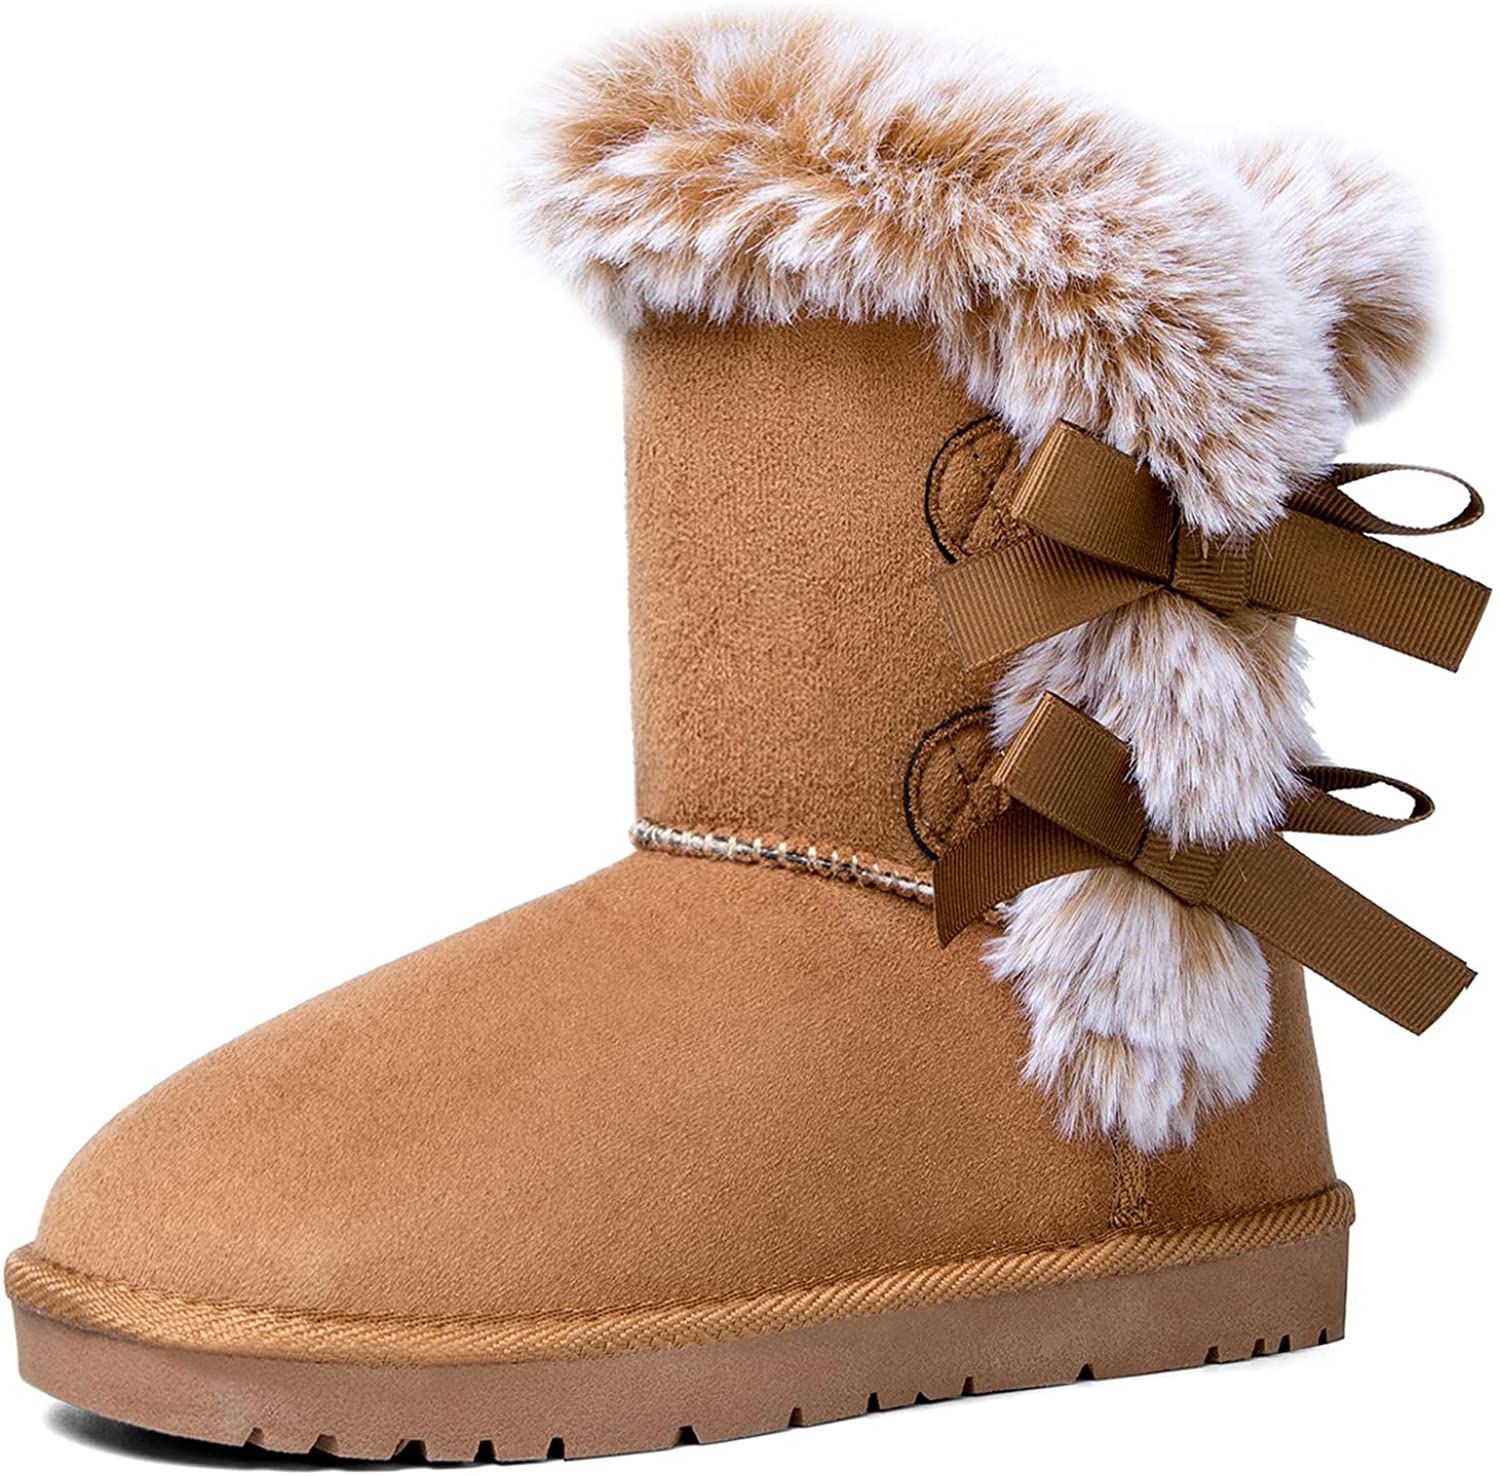 WFL Mid-Calf Fur-Lined Boots For Women